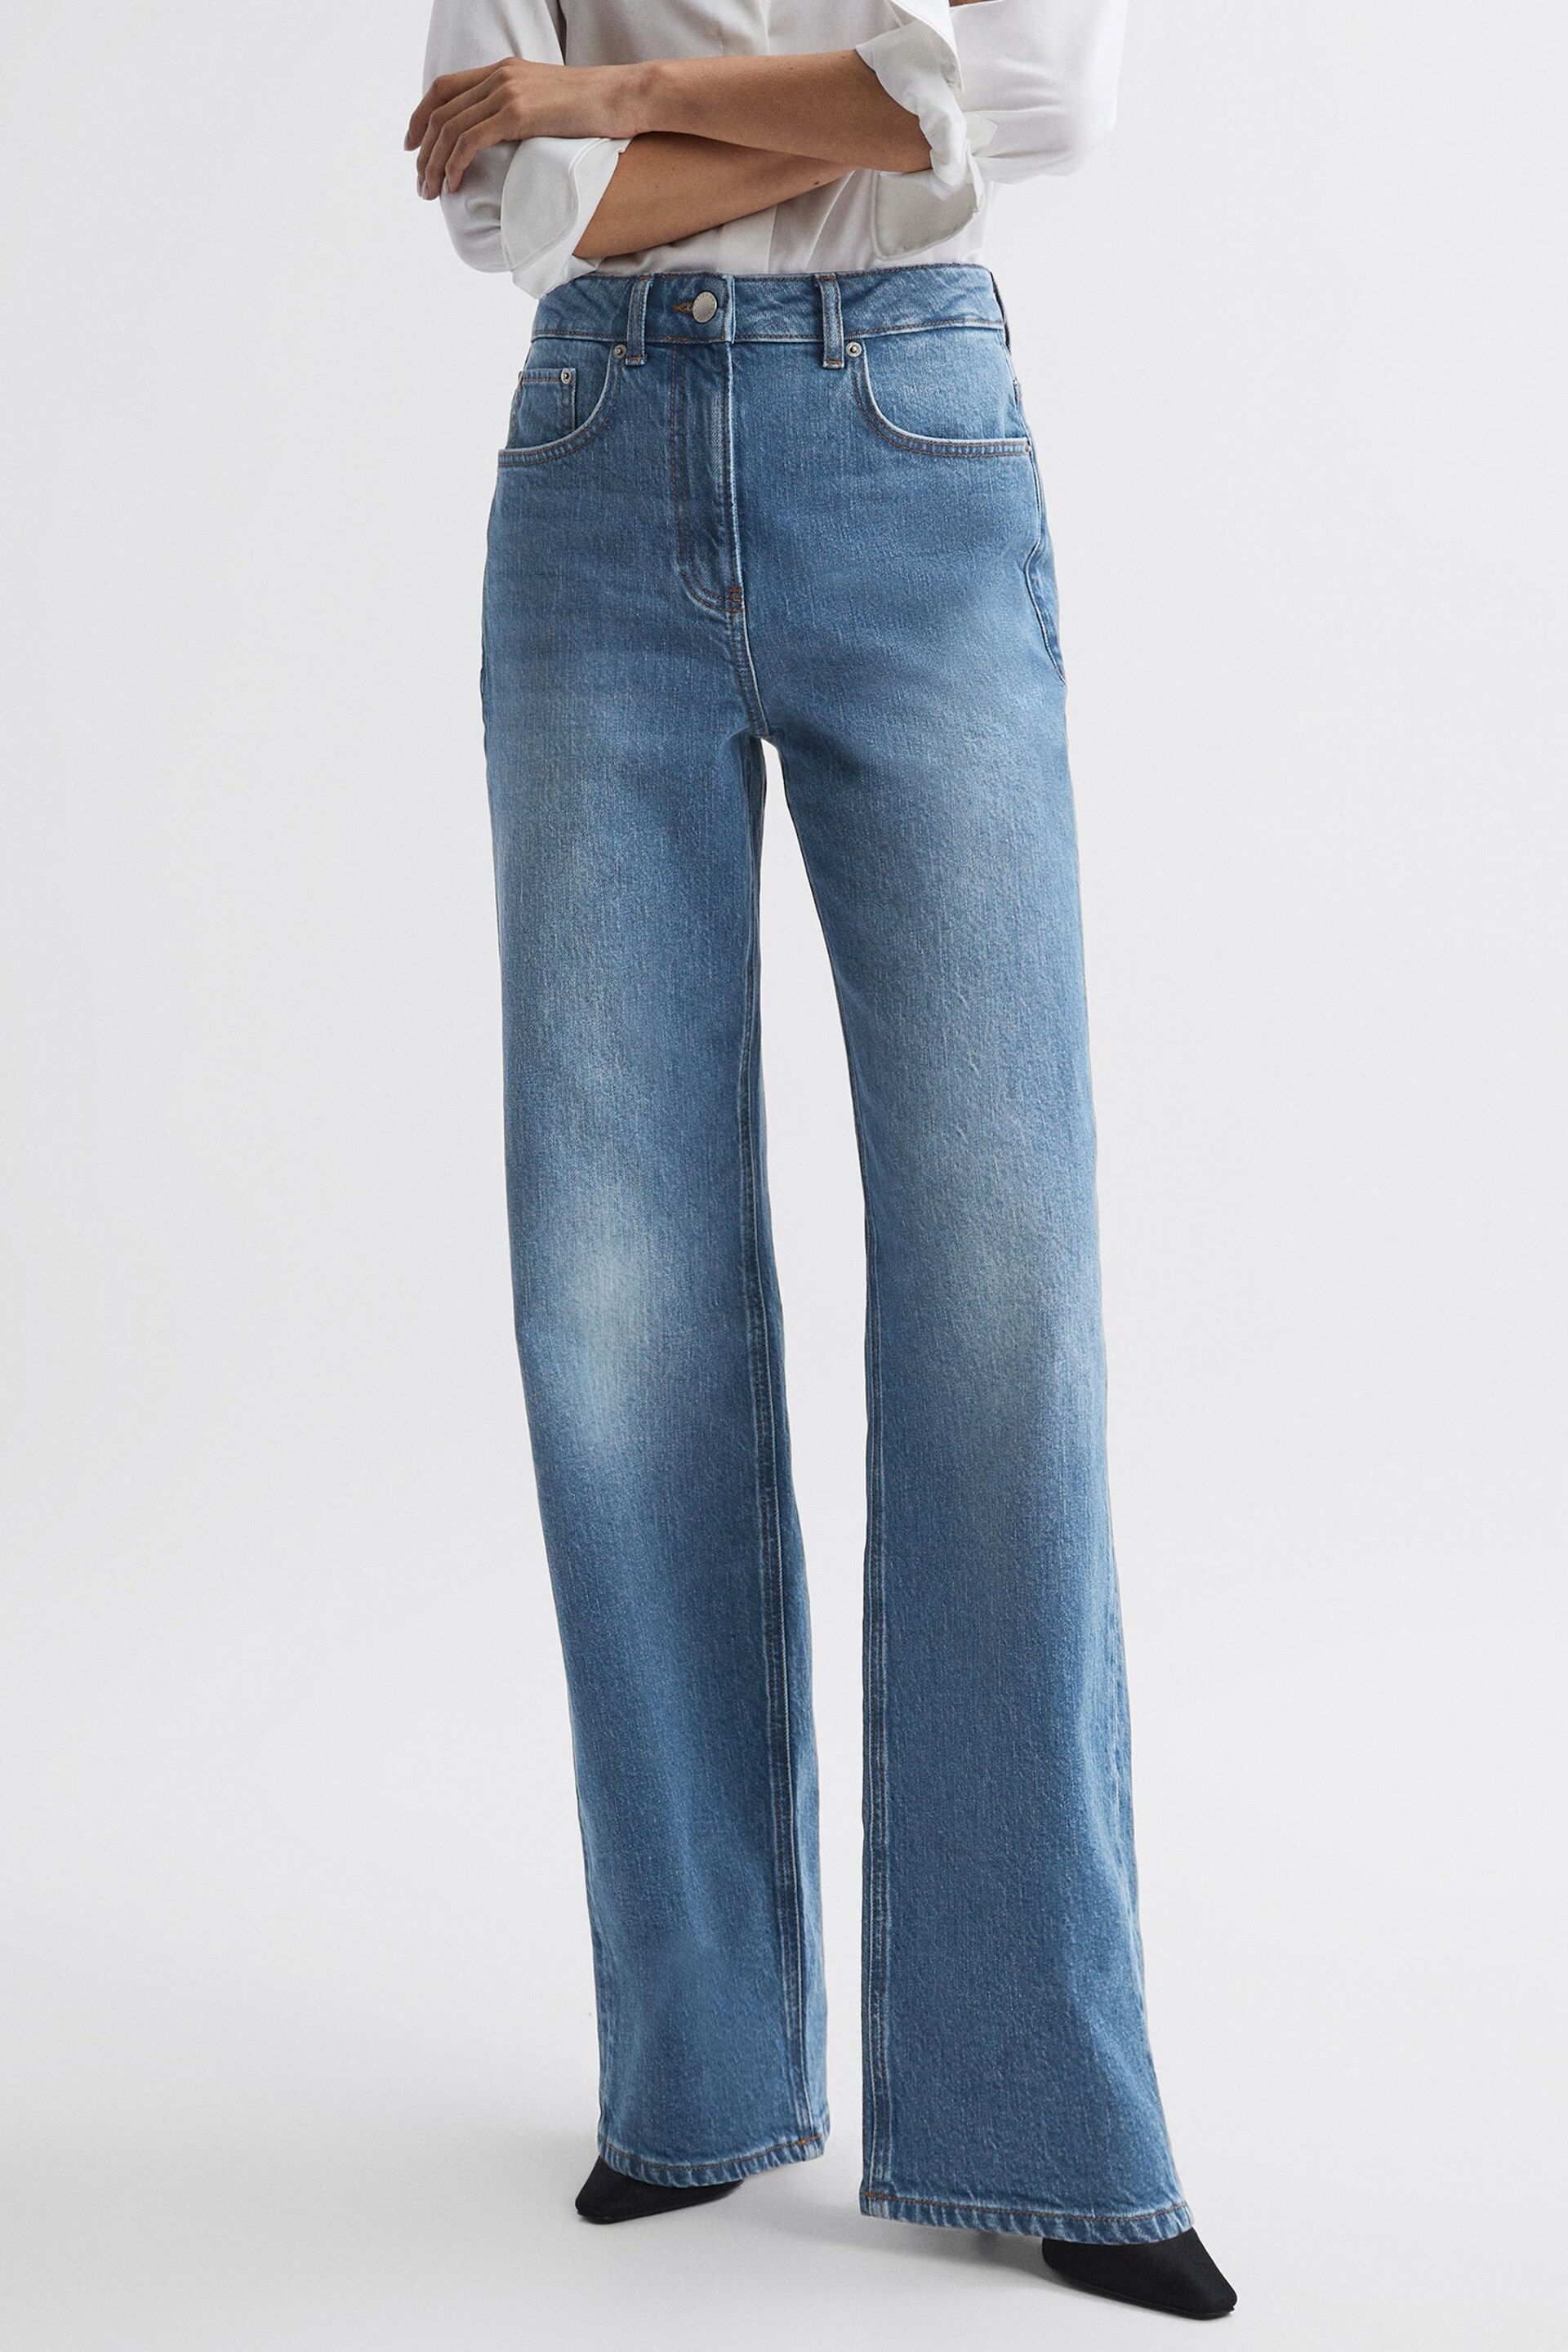 Reiss Mid Blue Marion Petite Mid Rise Wide Leg Jeans - Image 1 of 5